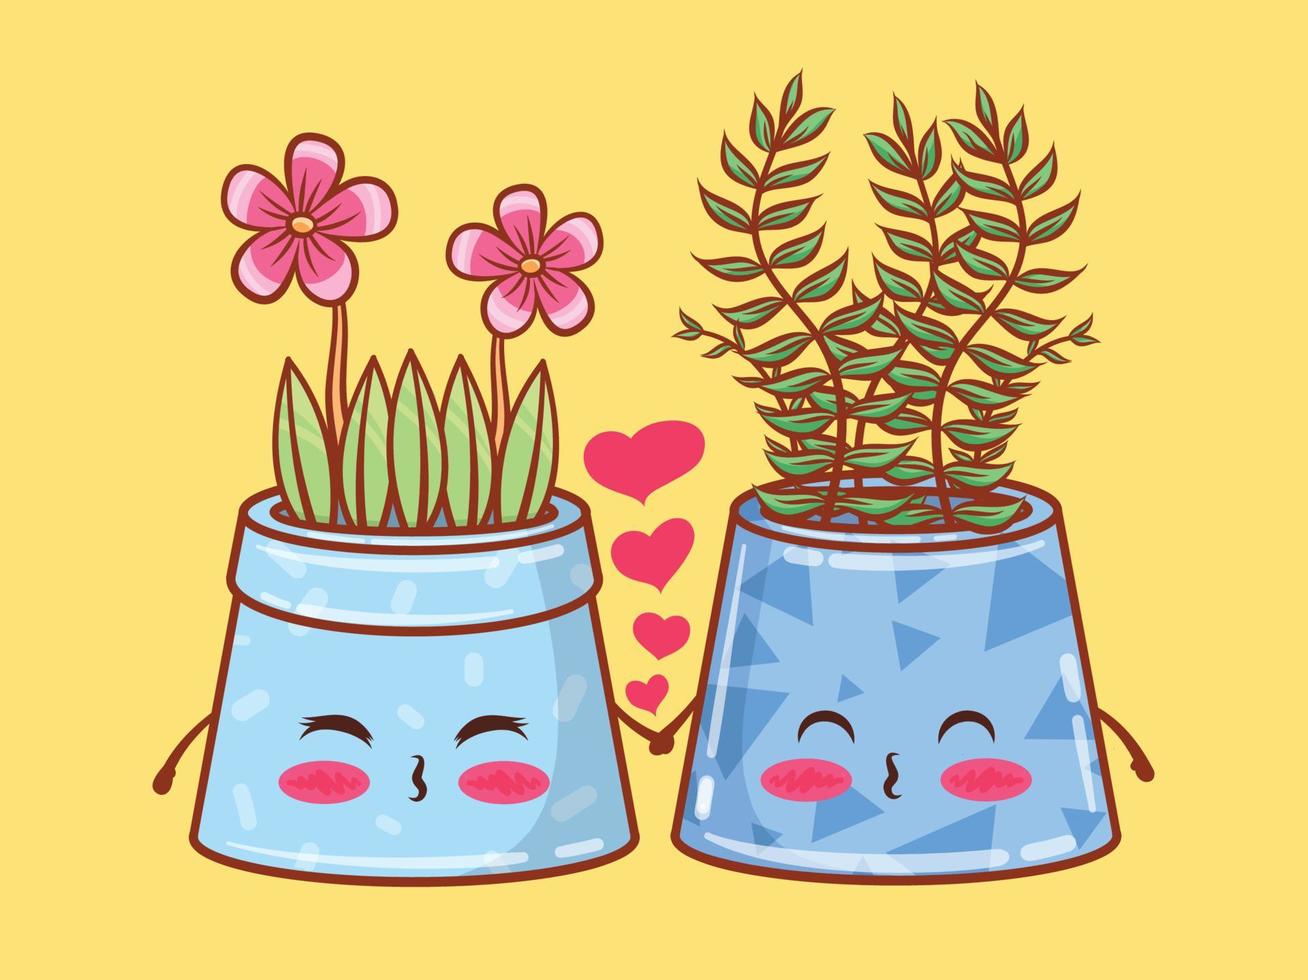 cute summer flower pot cartoon characters and illustrations. couple concept. vector